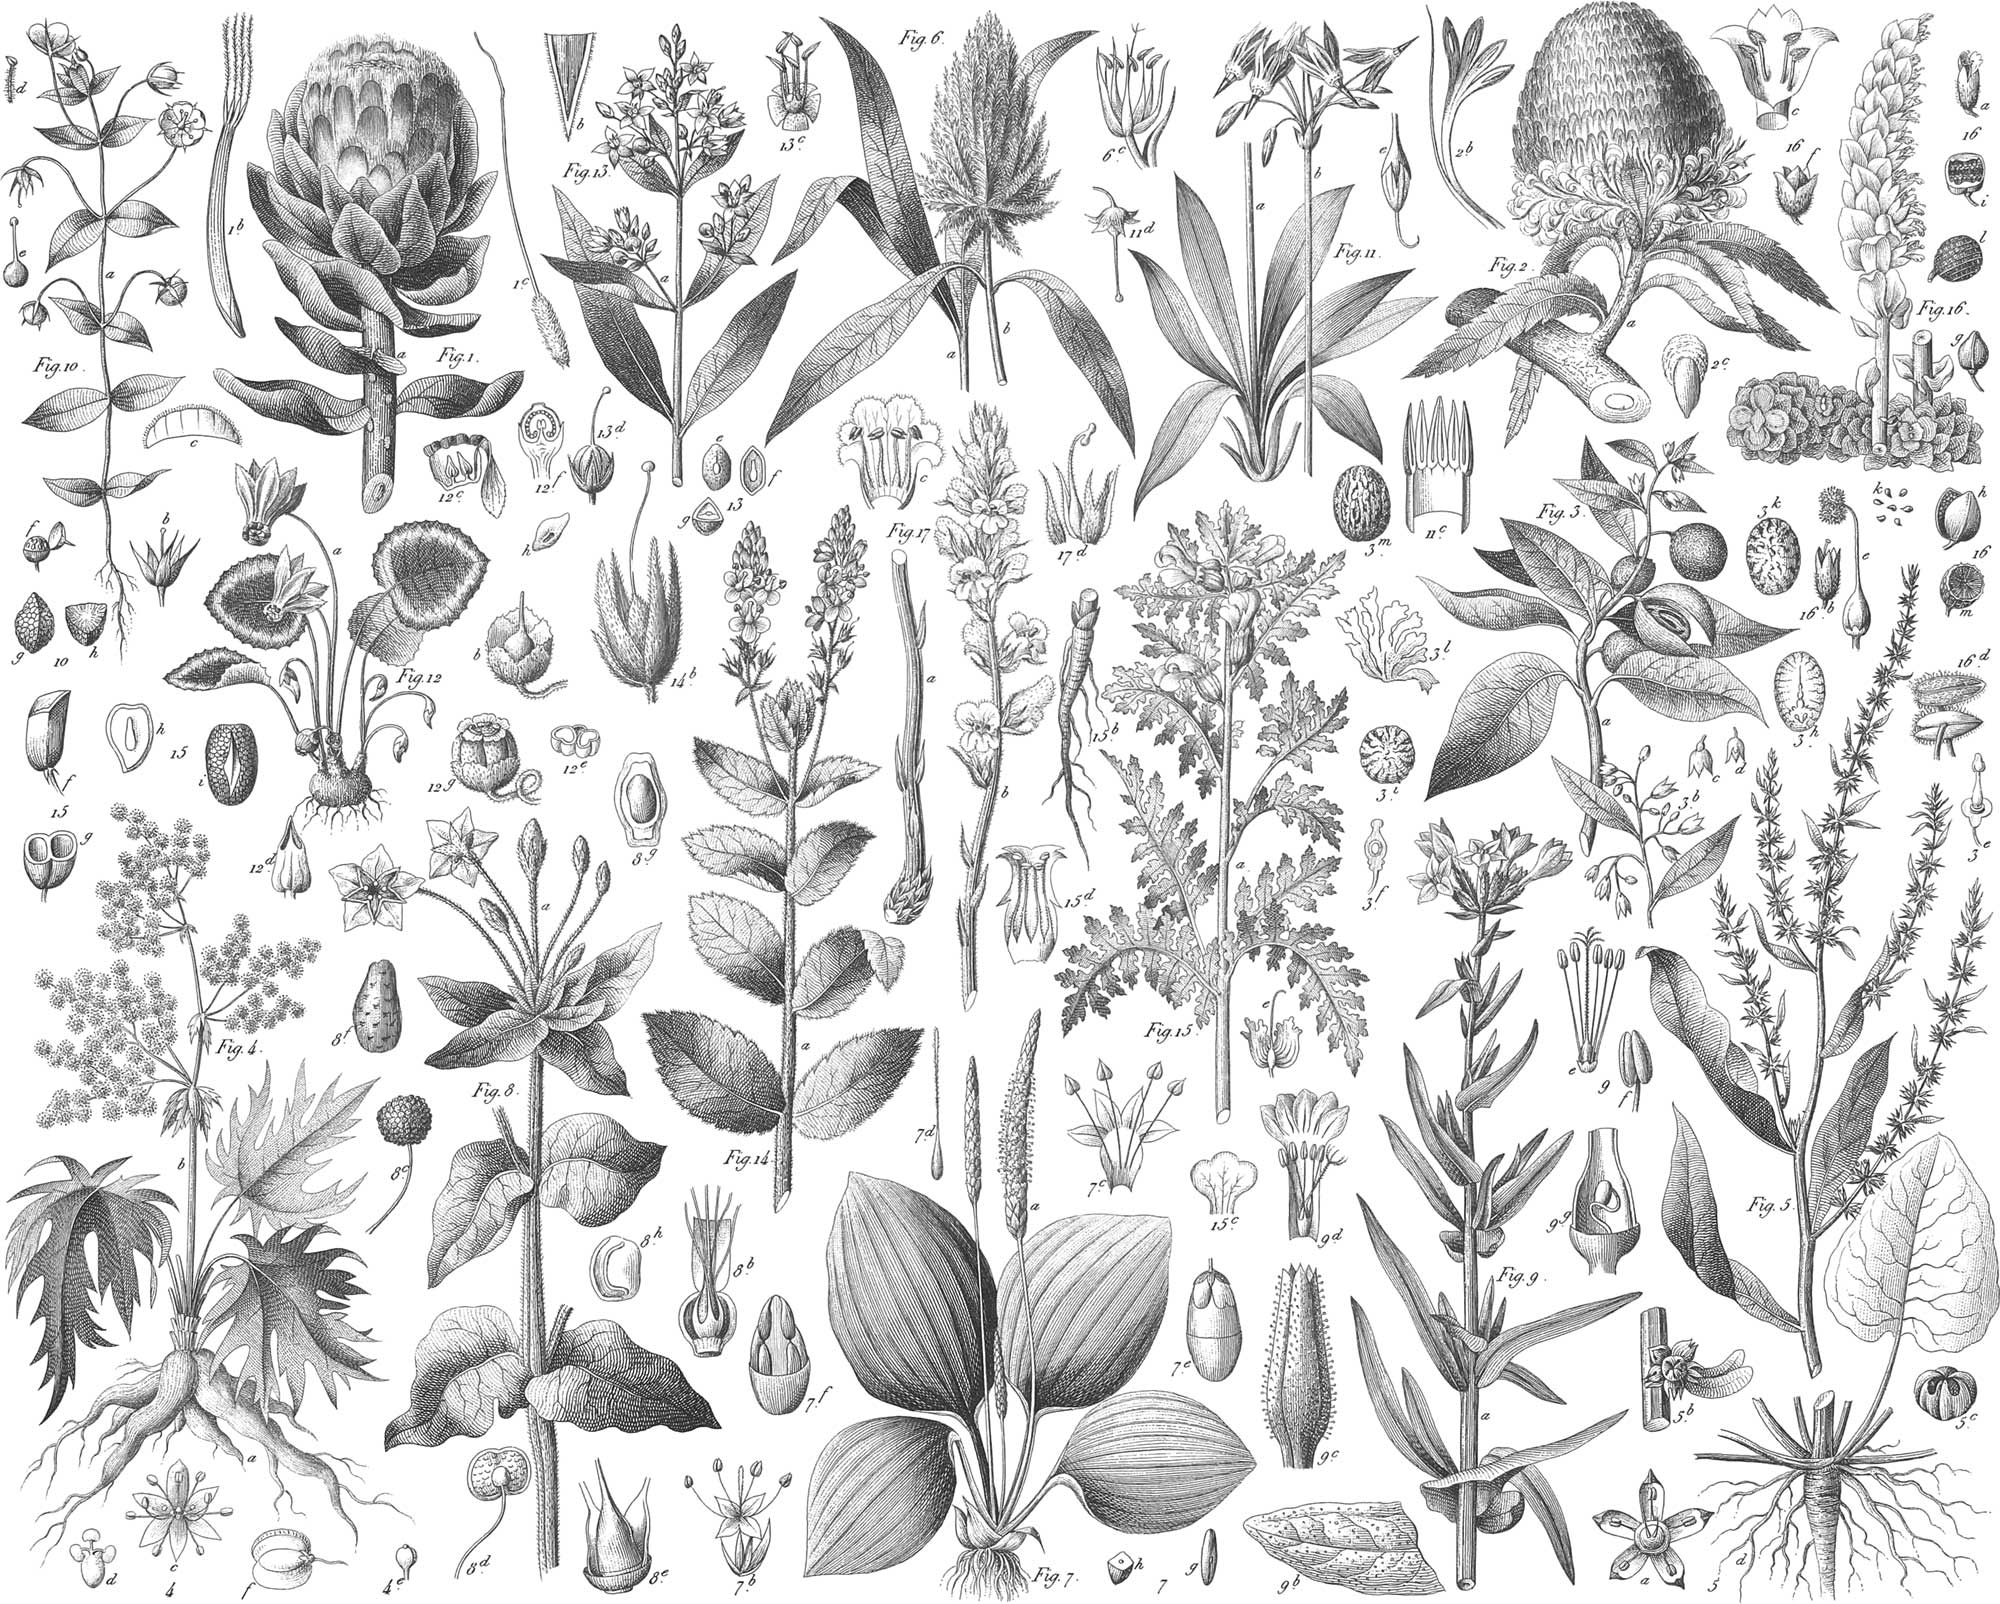 Botany - Iconographic Encyclopædia of Science, Literature, and Art